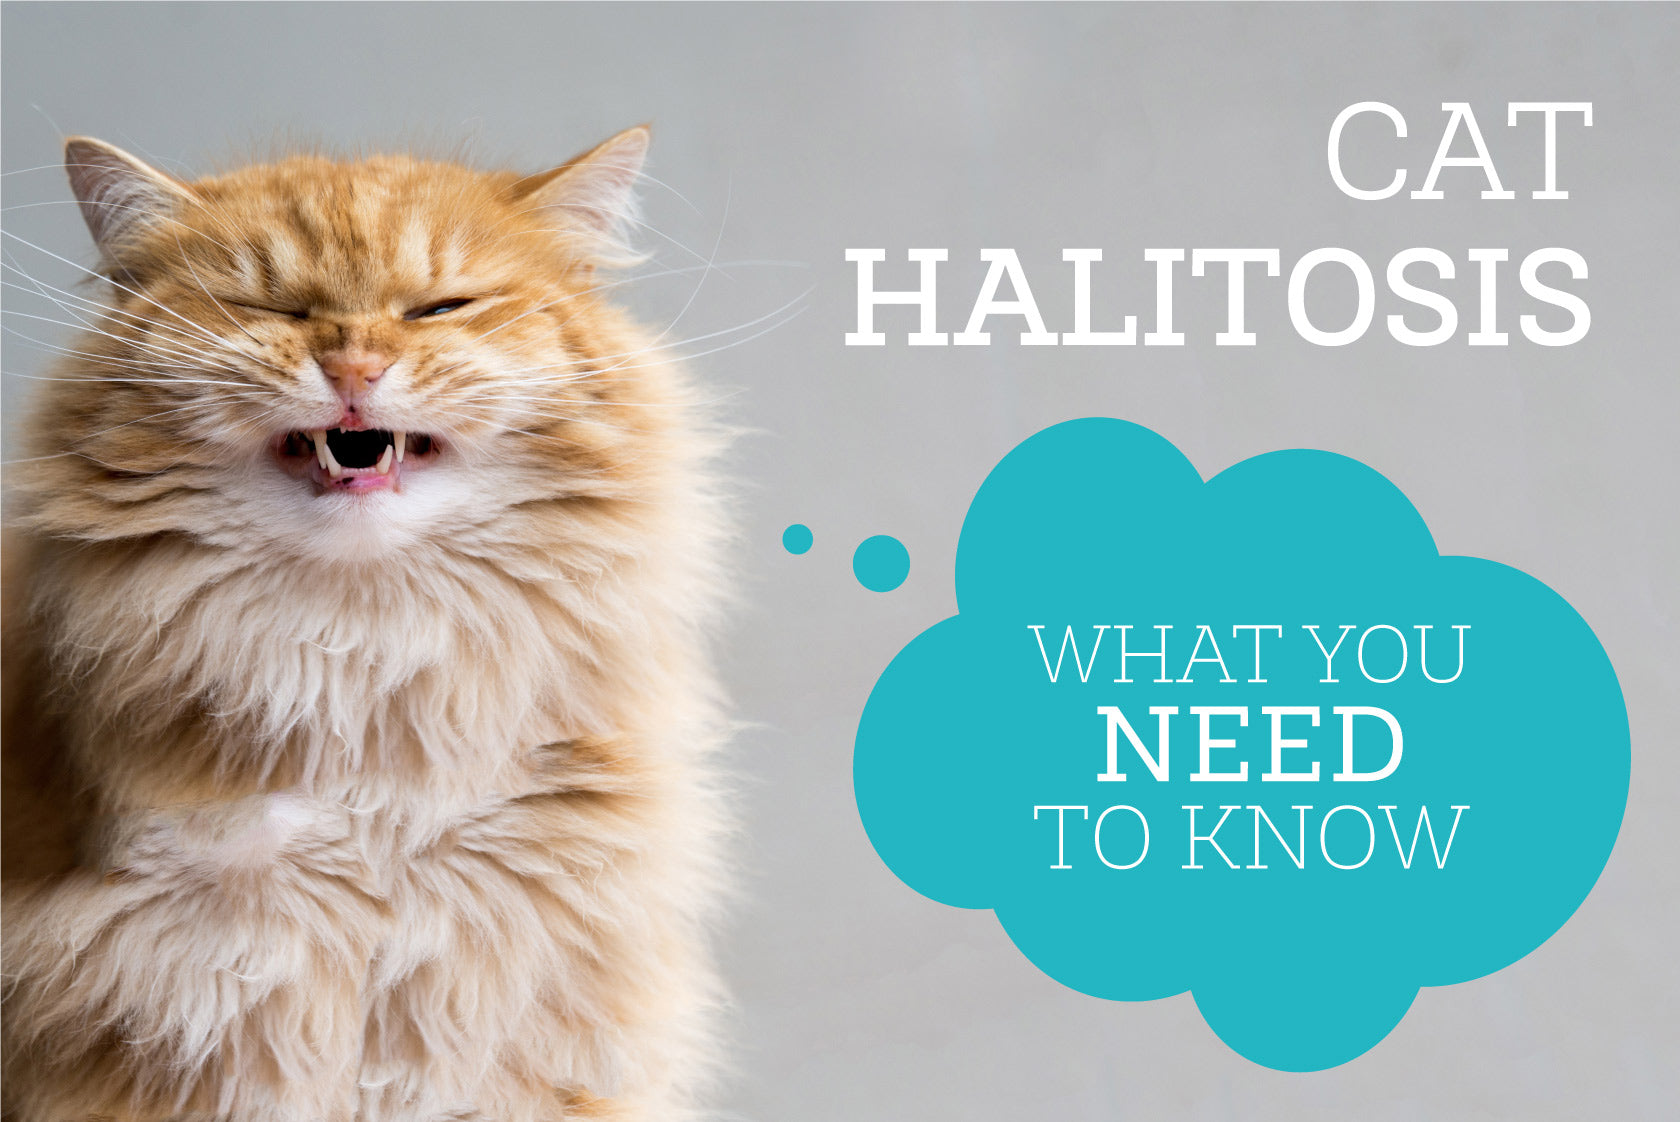 Oxyfresh - Cat Halitosis What You Need To Know